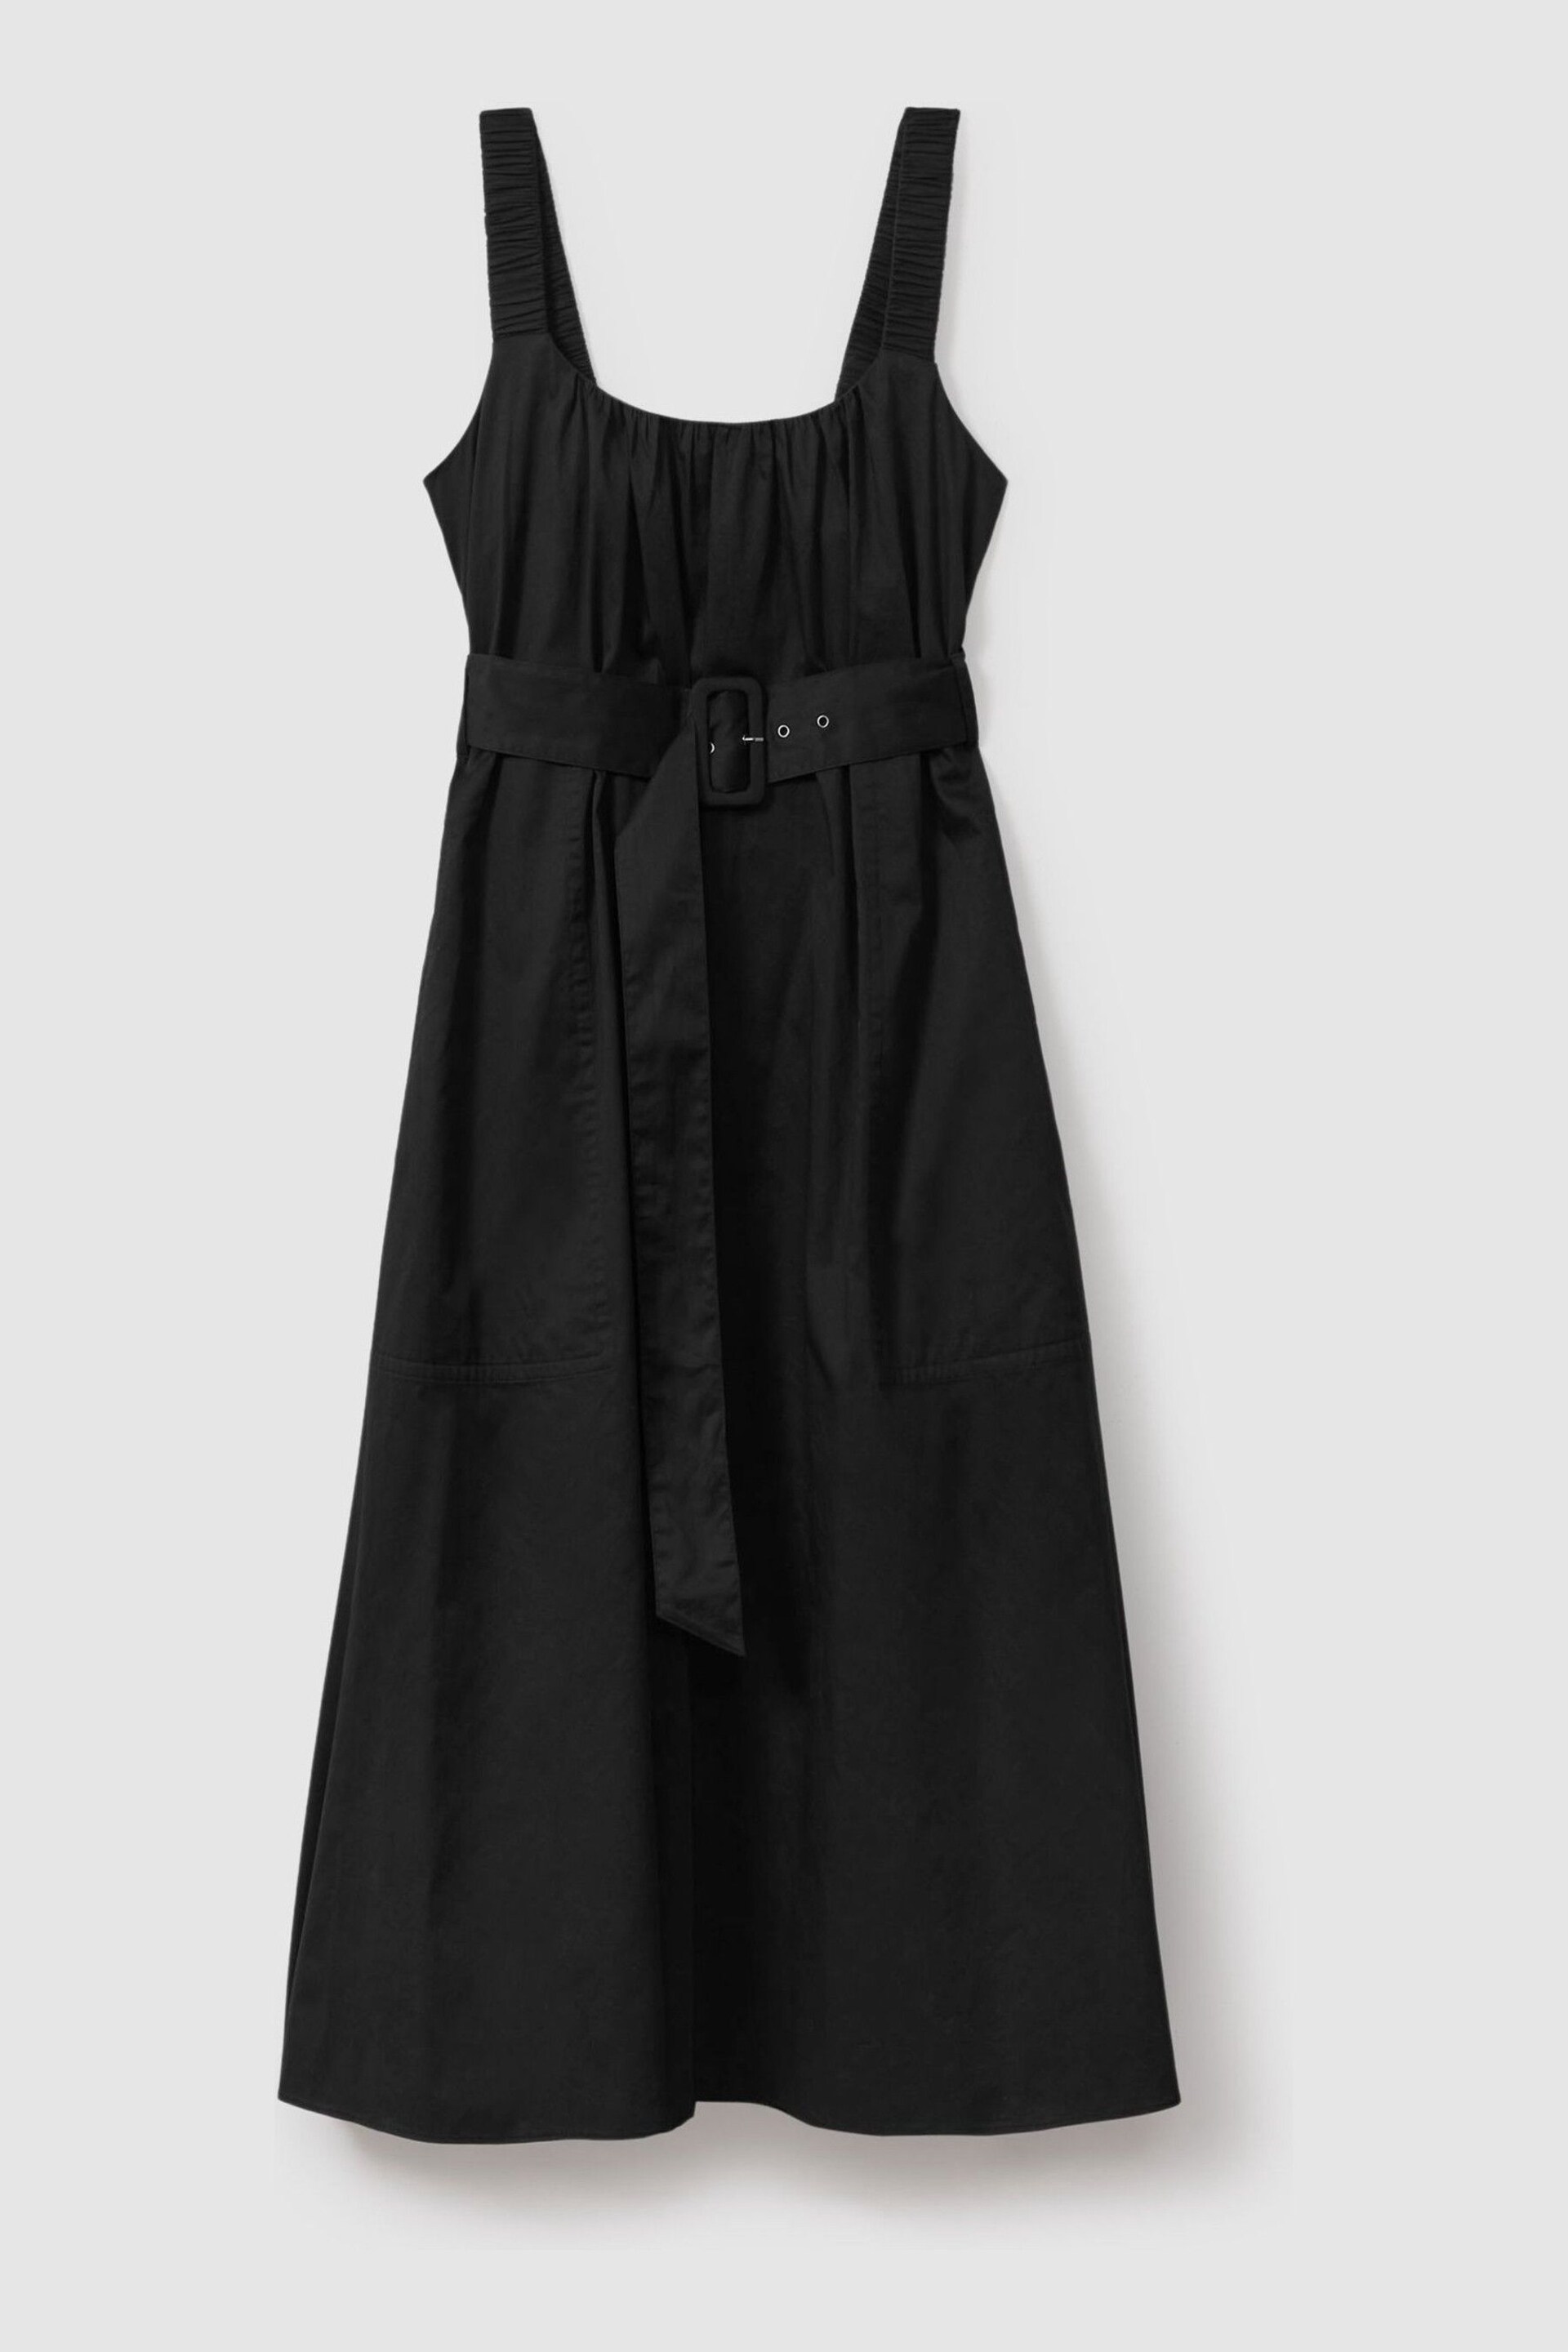 Reiss Black Liza Petite Cotton Ruched Strap Belted Midi Dress - Image 2 of 5